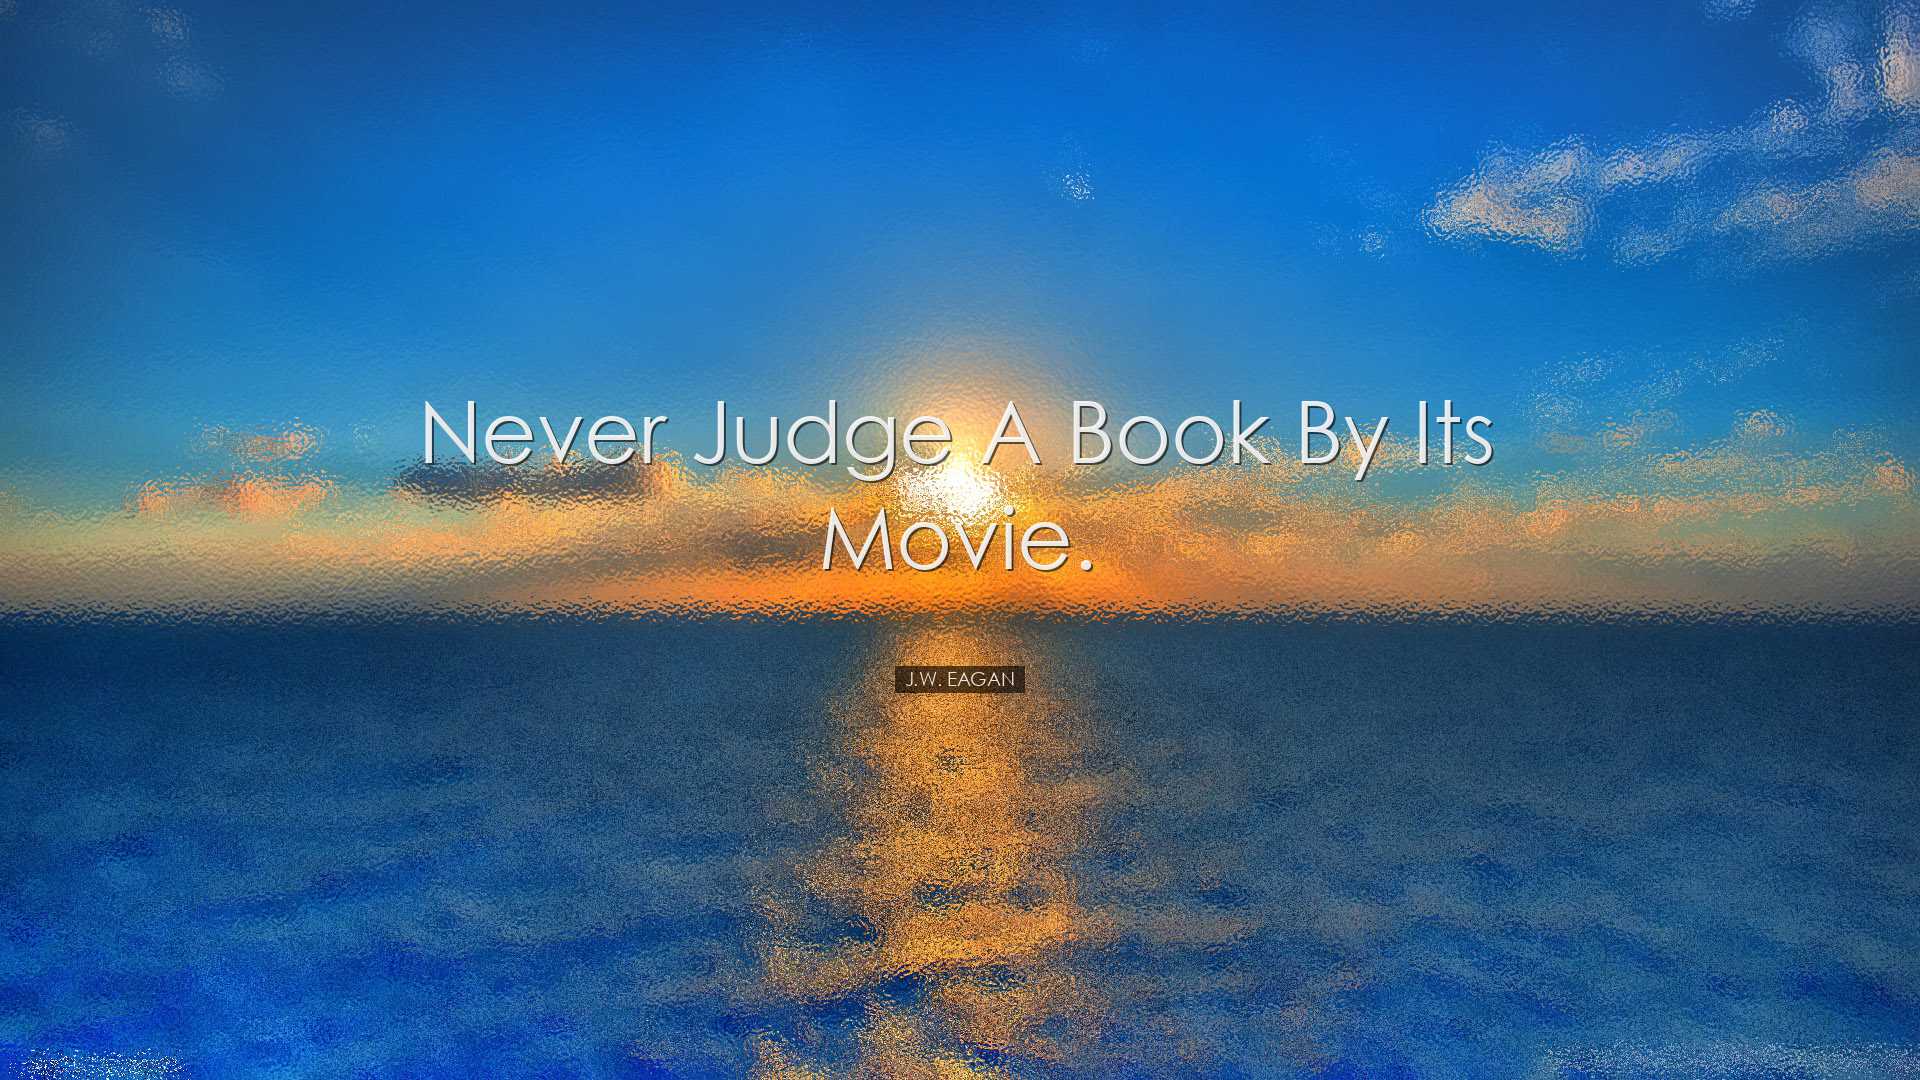 Never judge a book by its movie. - J.W. Eagan